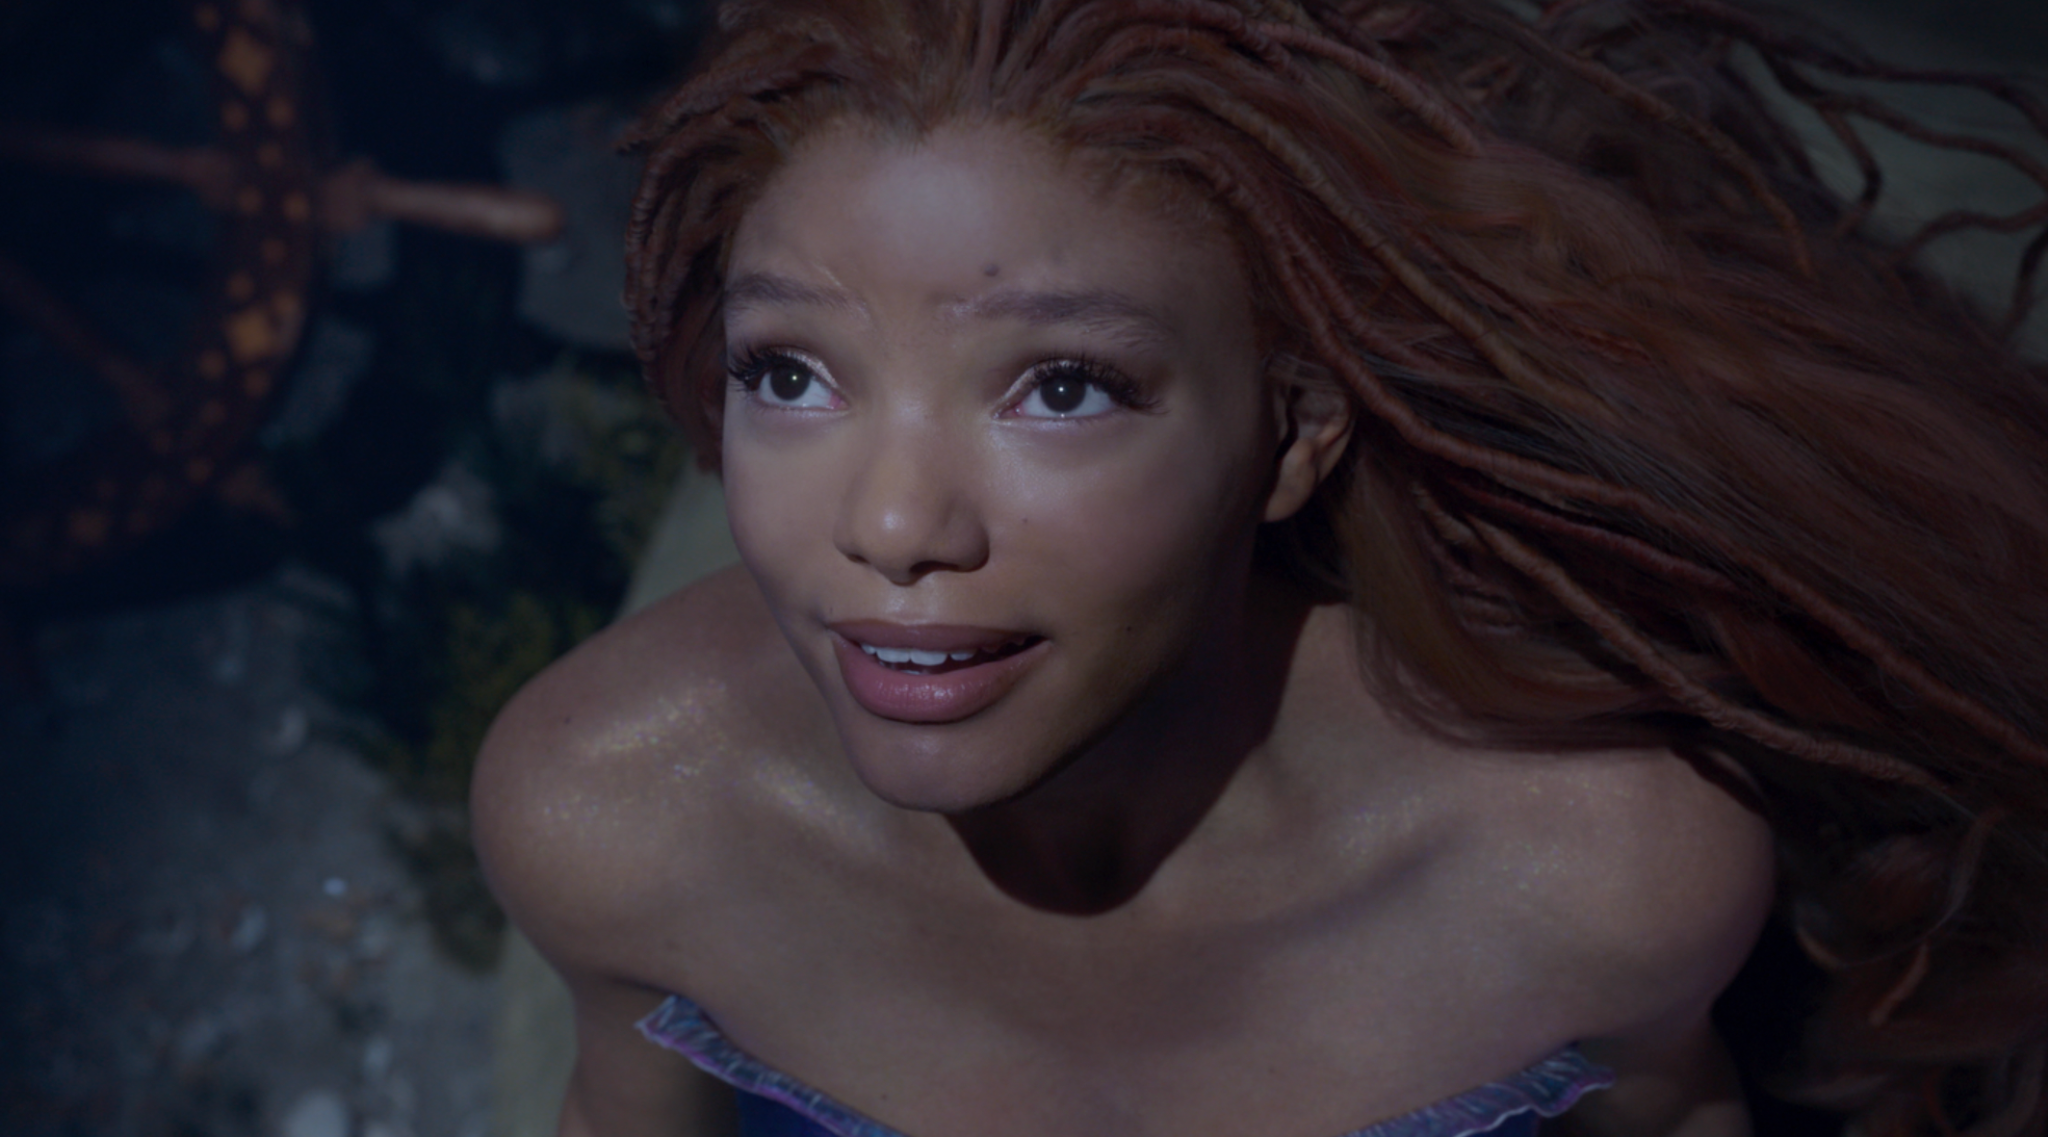 'The Little Mermaid' Trailer Provides First Look at Halle Bailey as Ariel